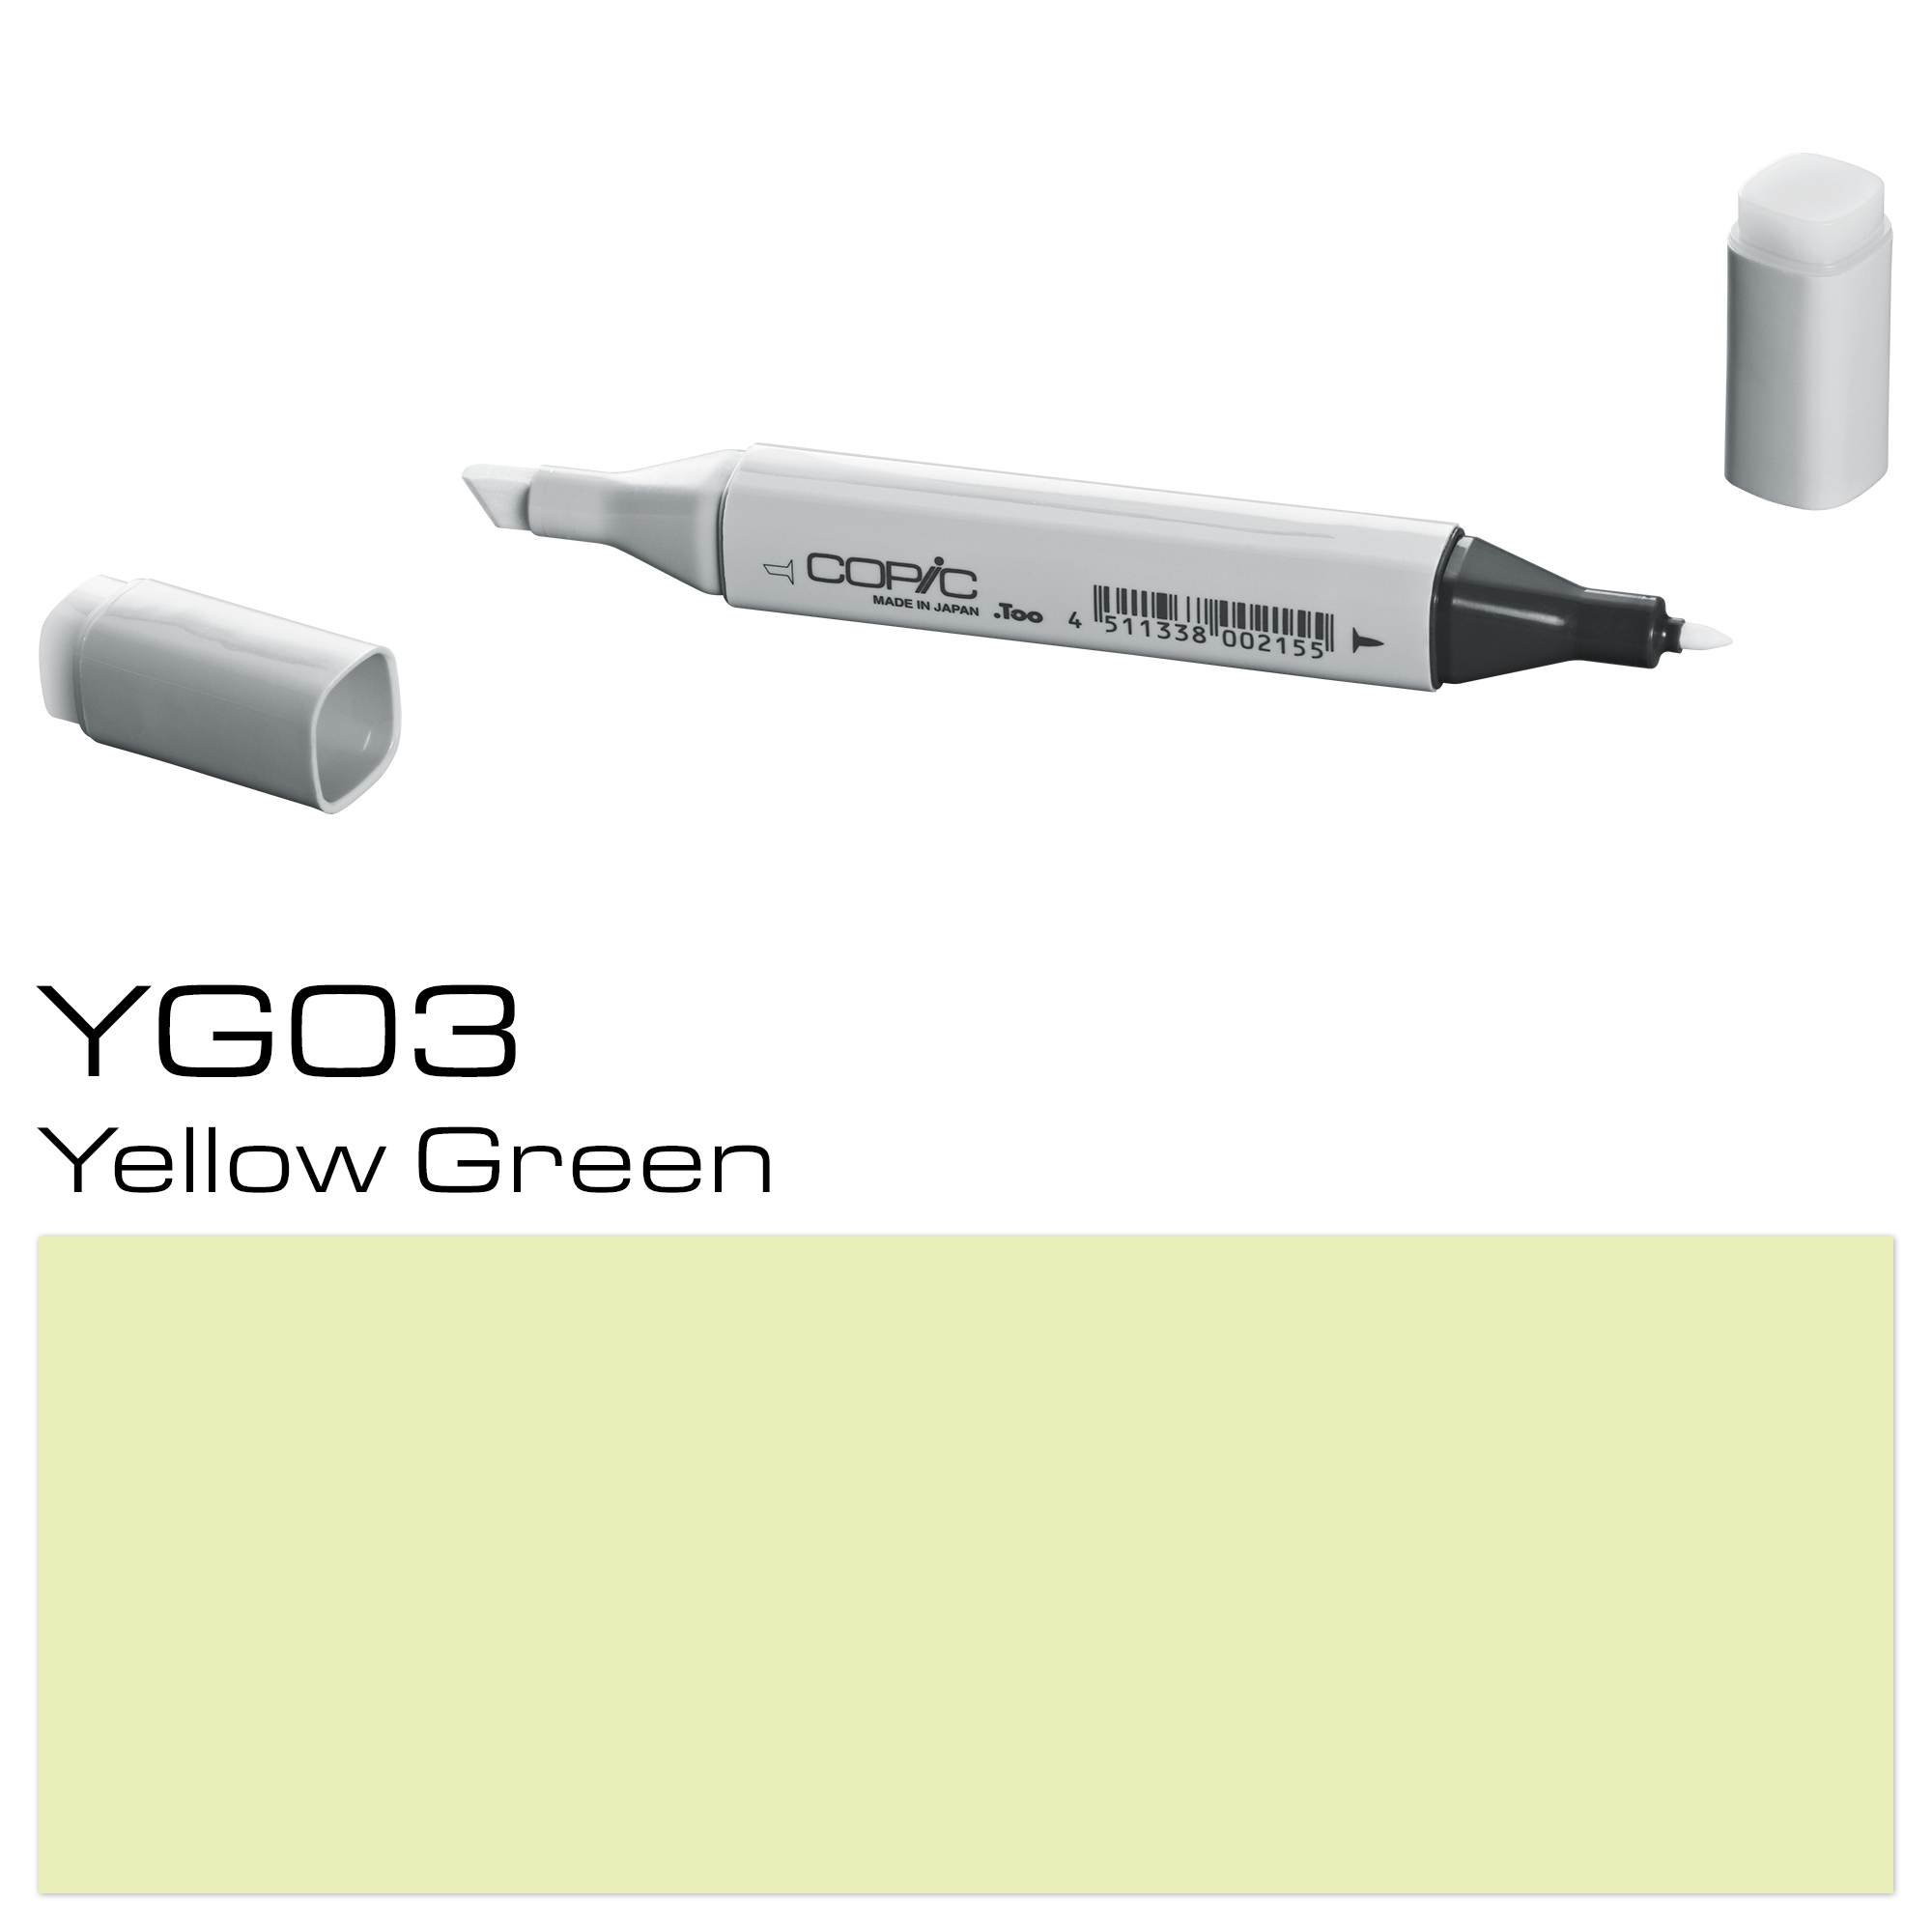 COPIC MARKER YELLOW GREEN YG03